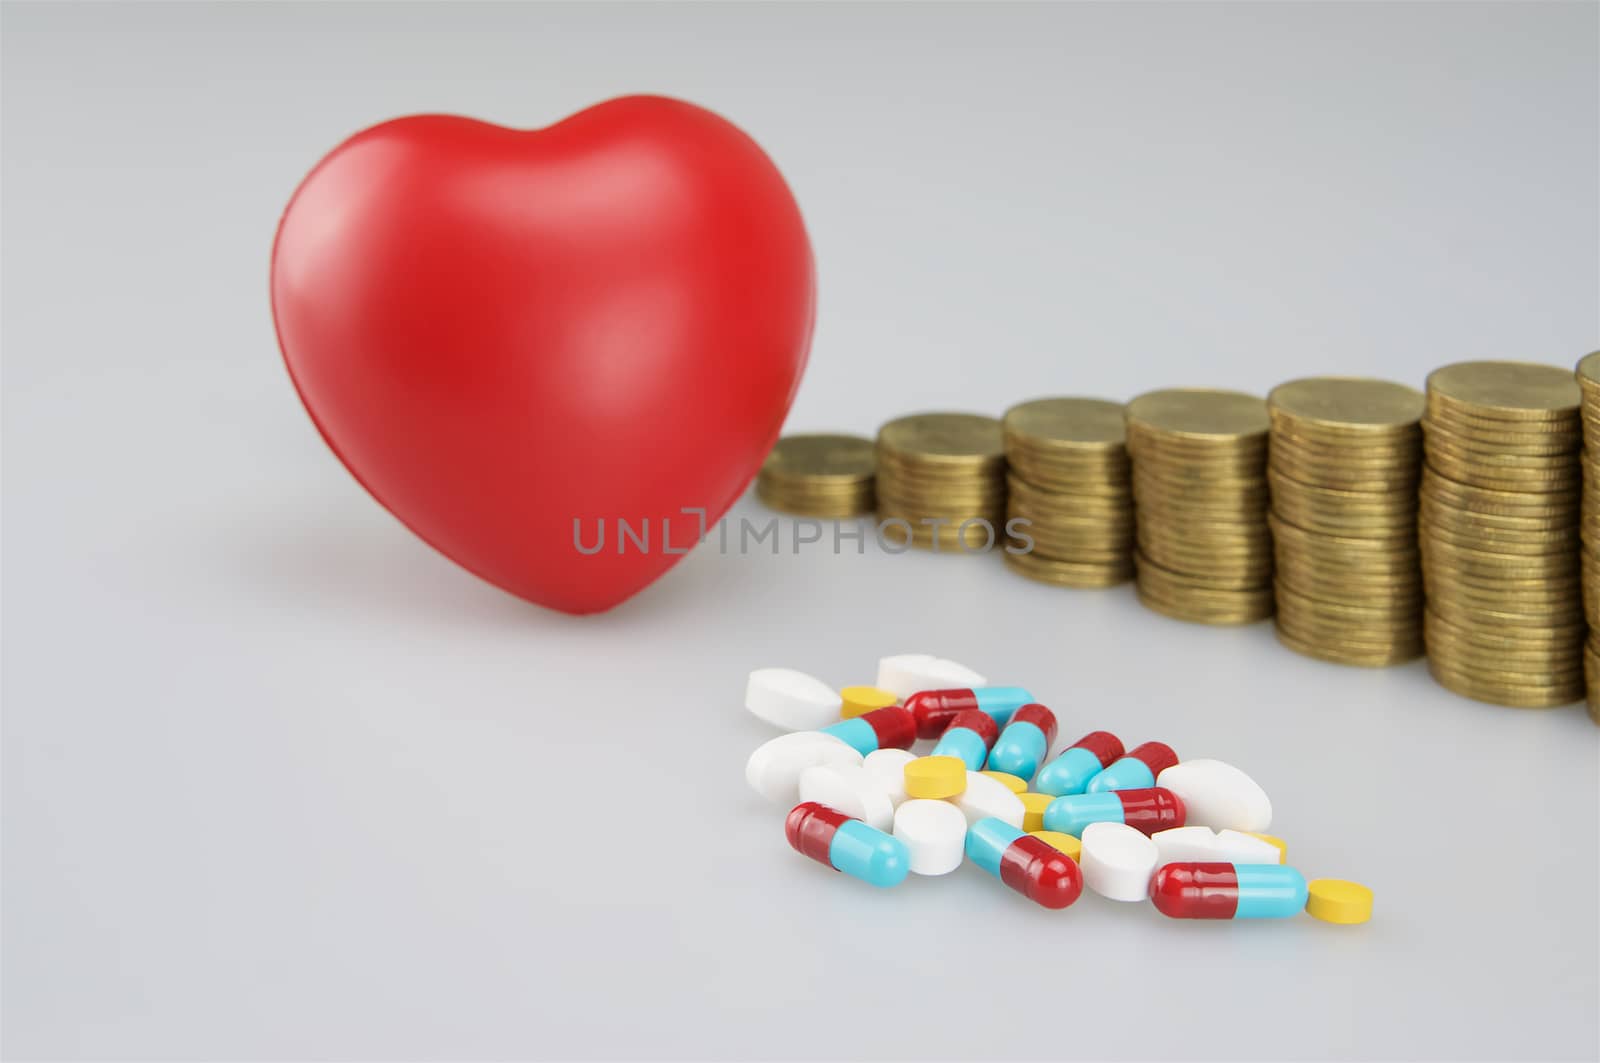 Stack of medicine and red heart with gold coins on white background.